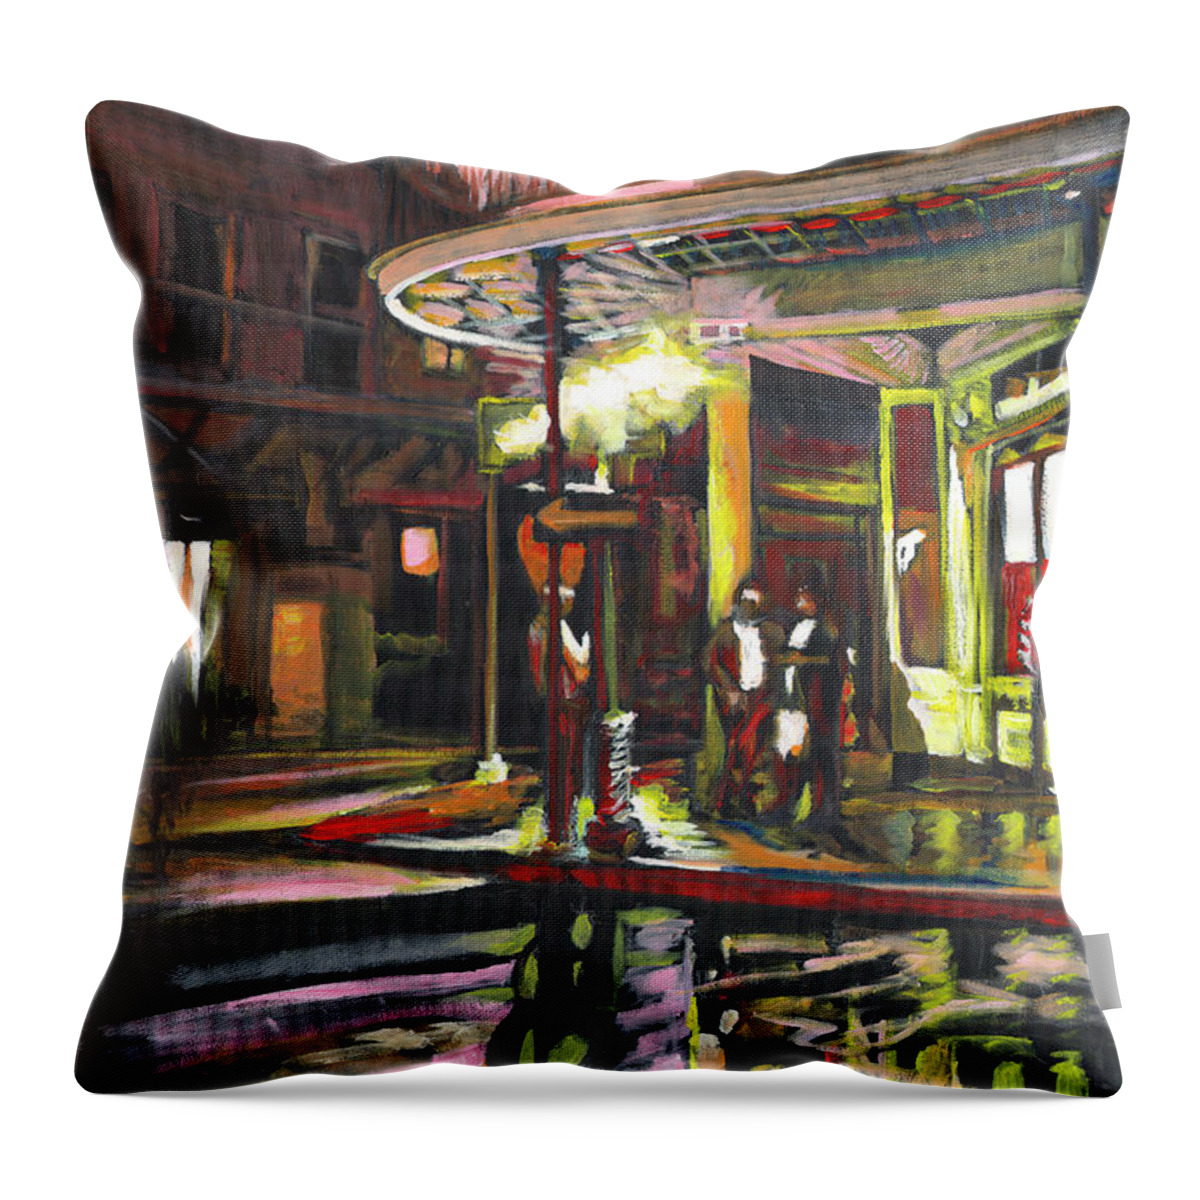 New Orleans Throw Pillow featuring the painting Night Shift by Amzie Adams